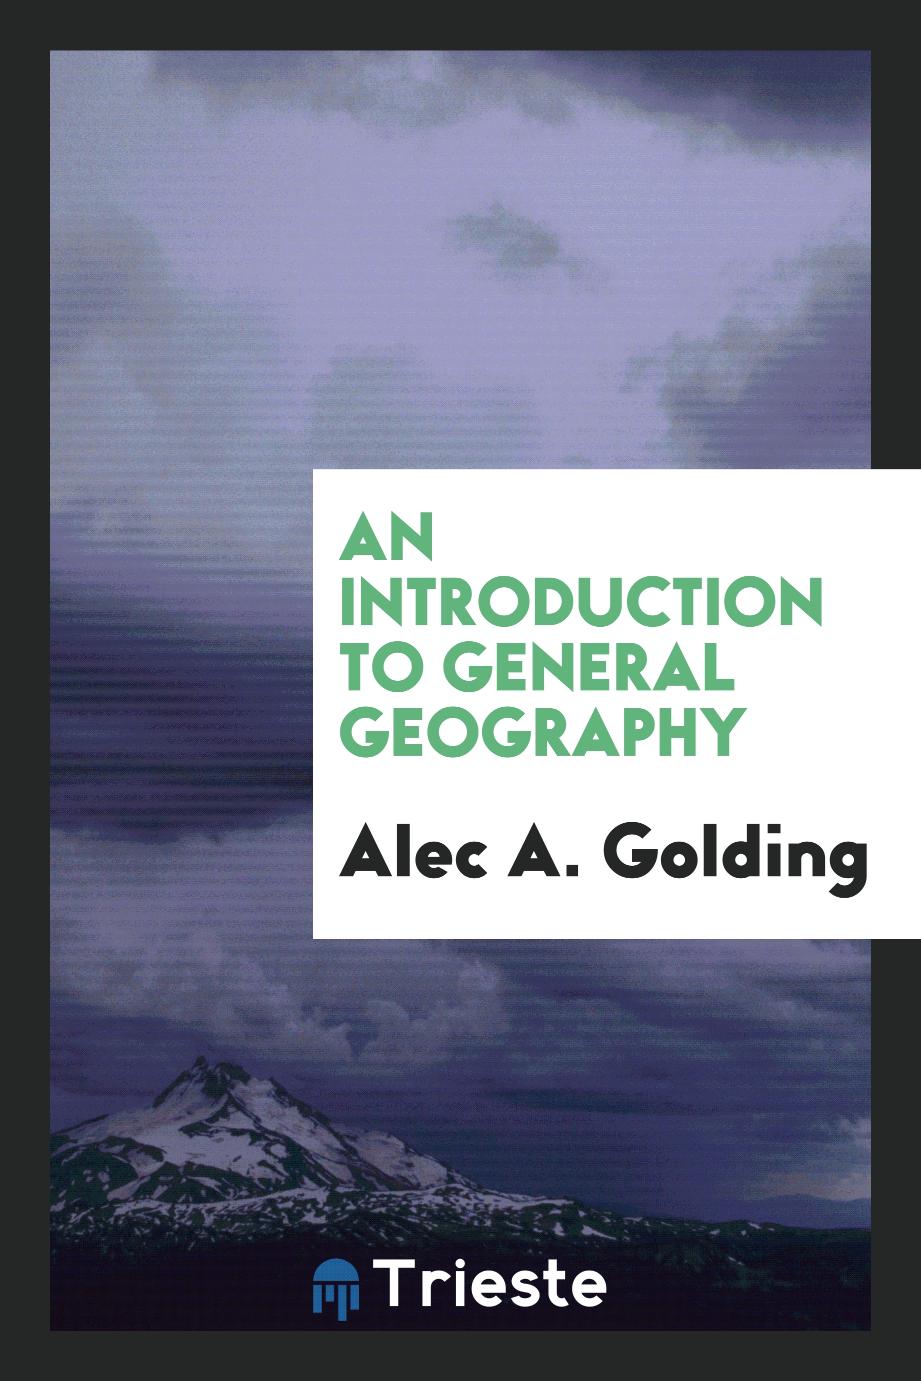 An introduction to general geography